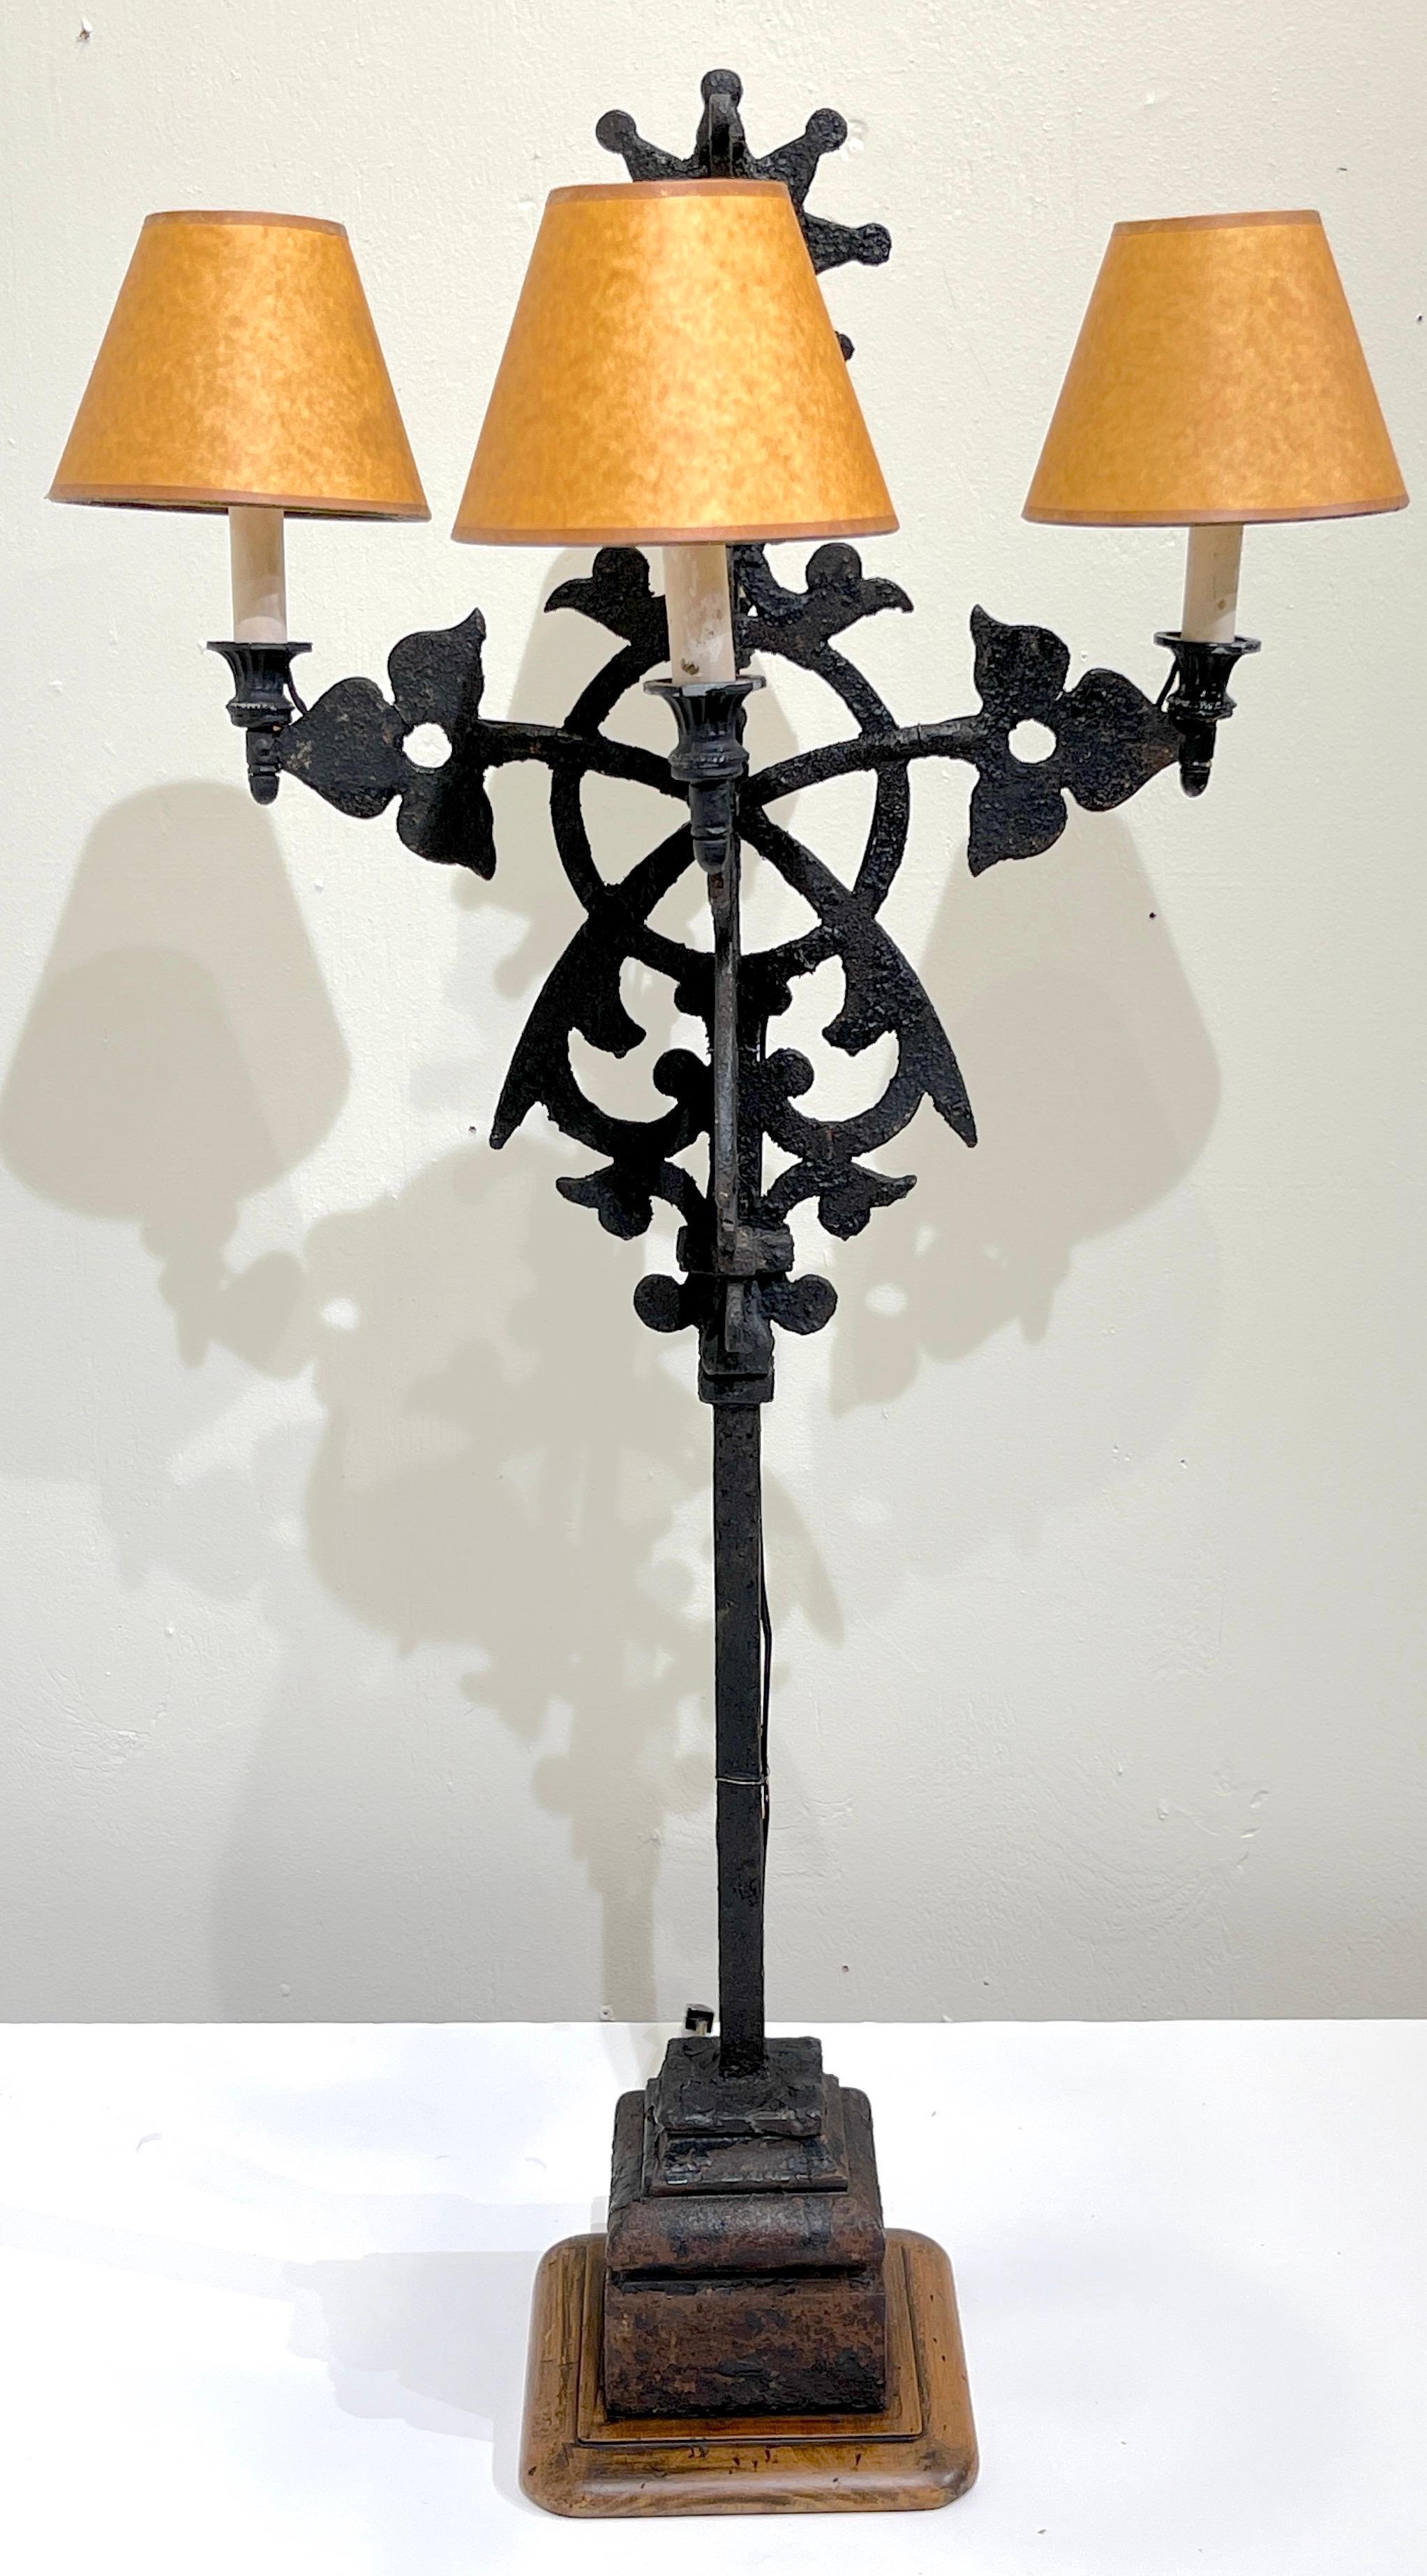 Spanish Colonial wrought iron sunburst Motif four-light candelabra, electrified
19th/20th century now electrified
Complete with four Parchment lamp shades 

Standing tall, this impressive rustic wrought iron sculptural candelabra, with